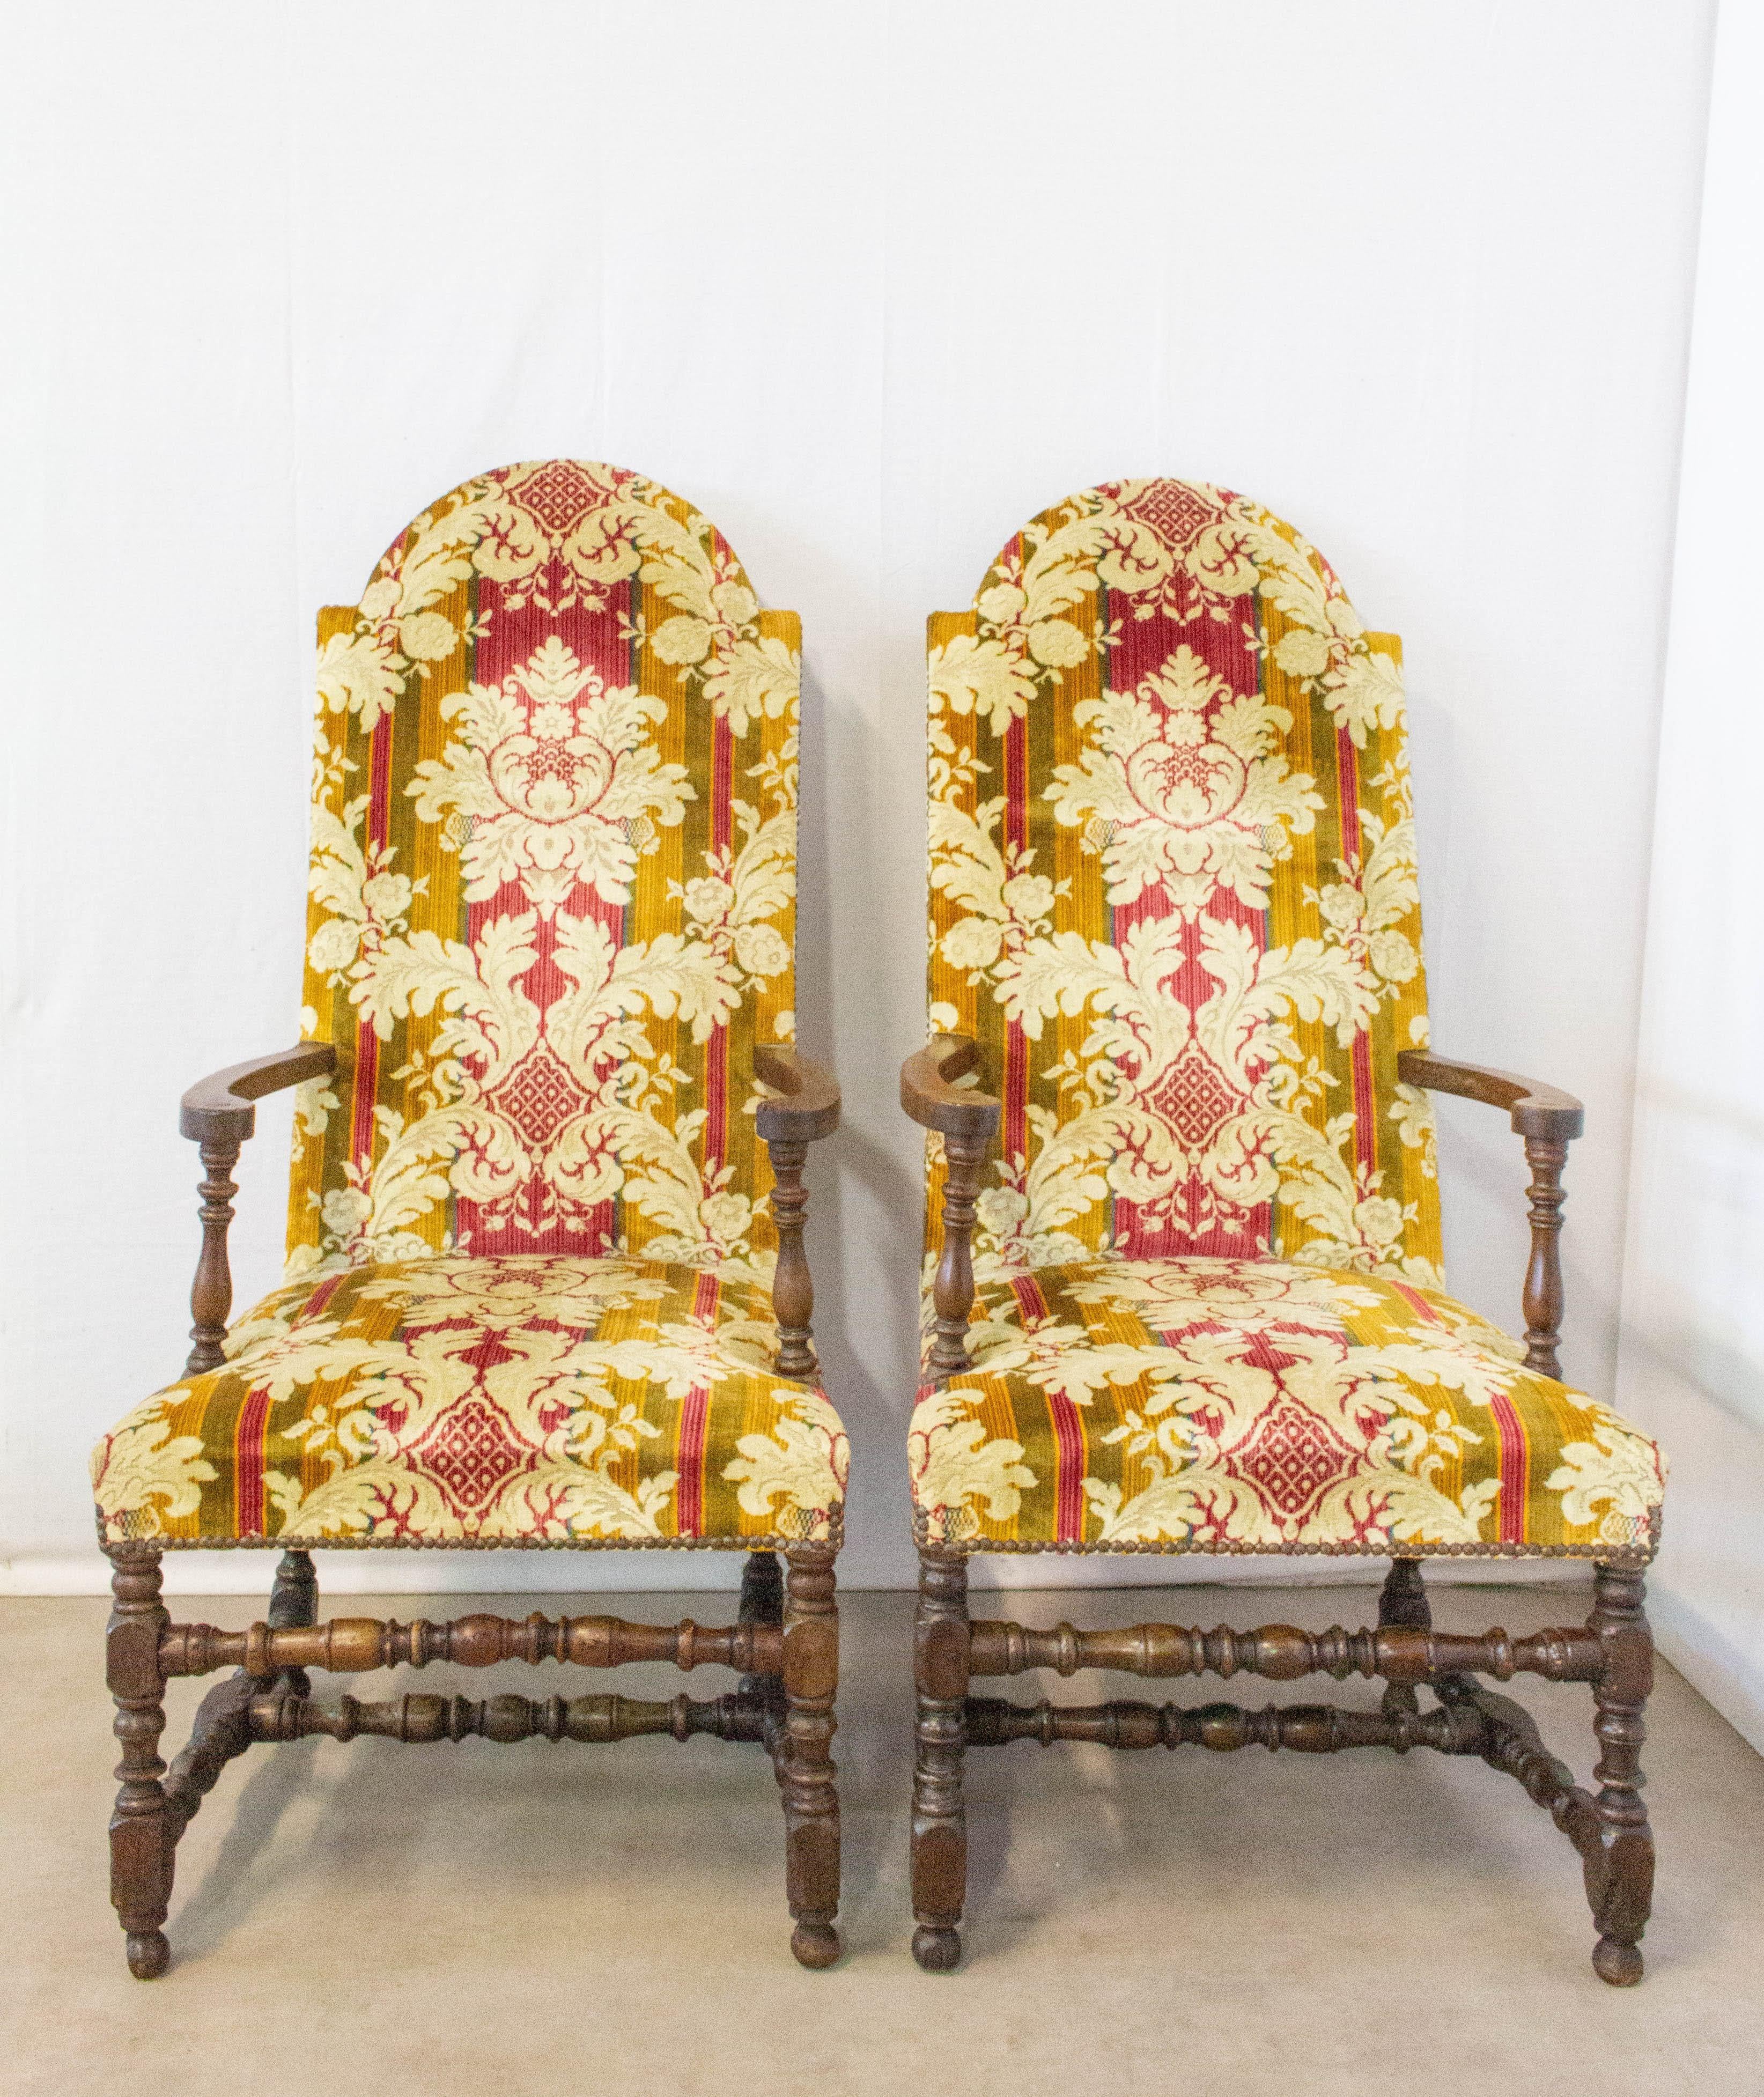 Late 18th century pair of open armchairs Spain
Renaissance Revival
Good antique condition wood frames are solid and sound, covers easily changed to suit your interior, upholstery is good and may need a couple of simple minor adjustments if